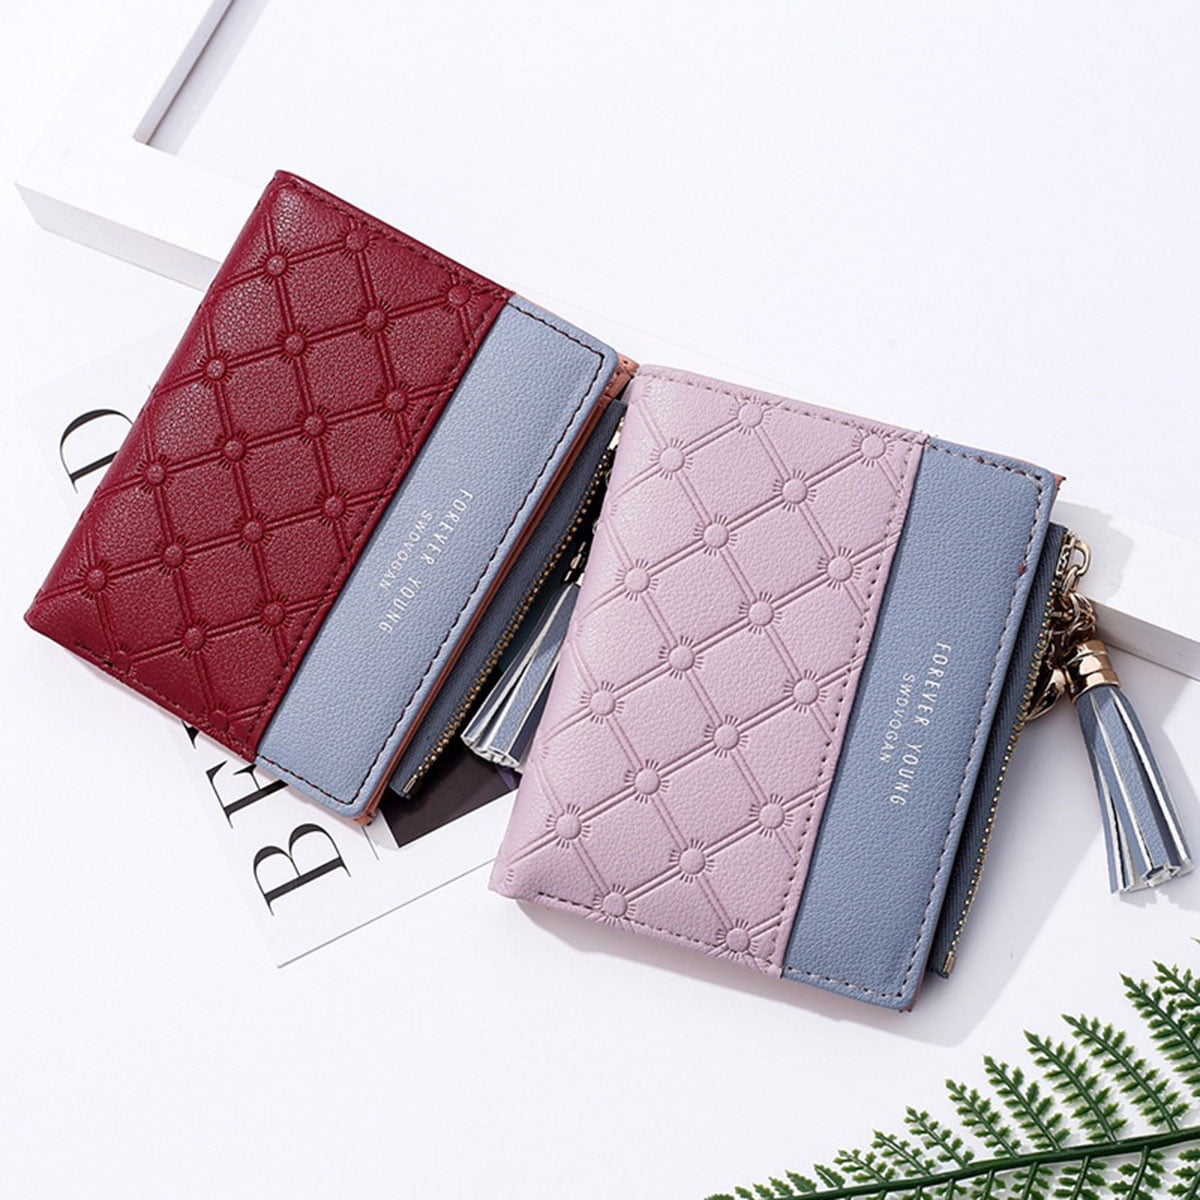 QWZNDZGR NEW Solid Color Small Wallets Soft PU Leather Coin Mini Wallet  Ladies Fashion Brand Zipper Designer Card Holder Purses Female